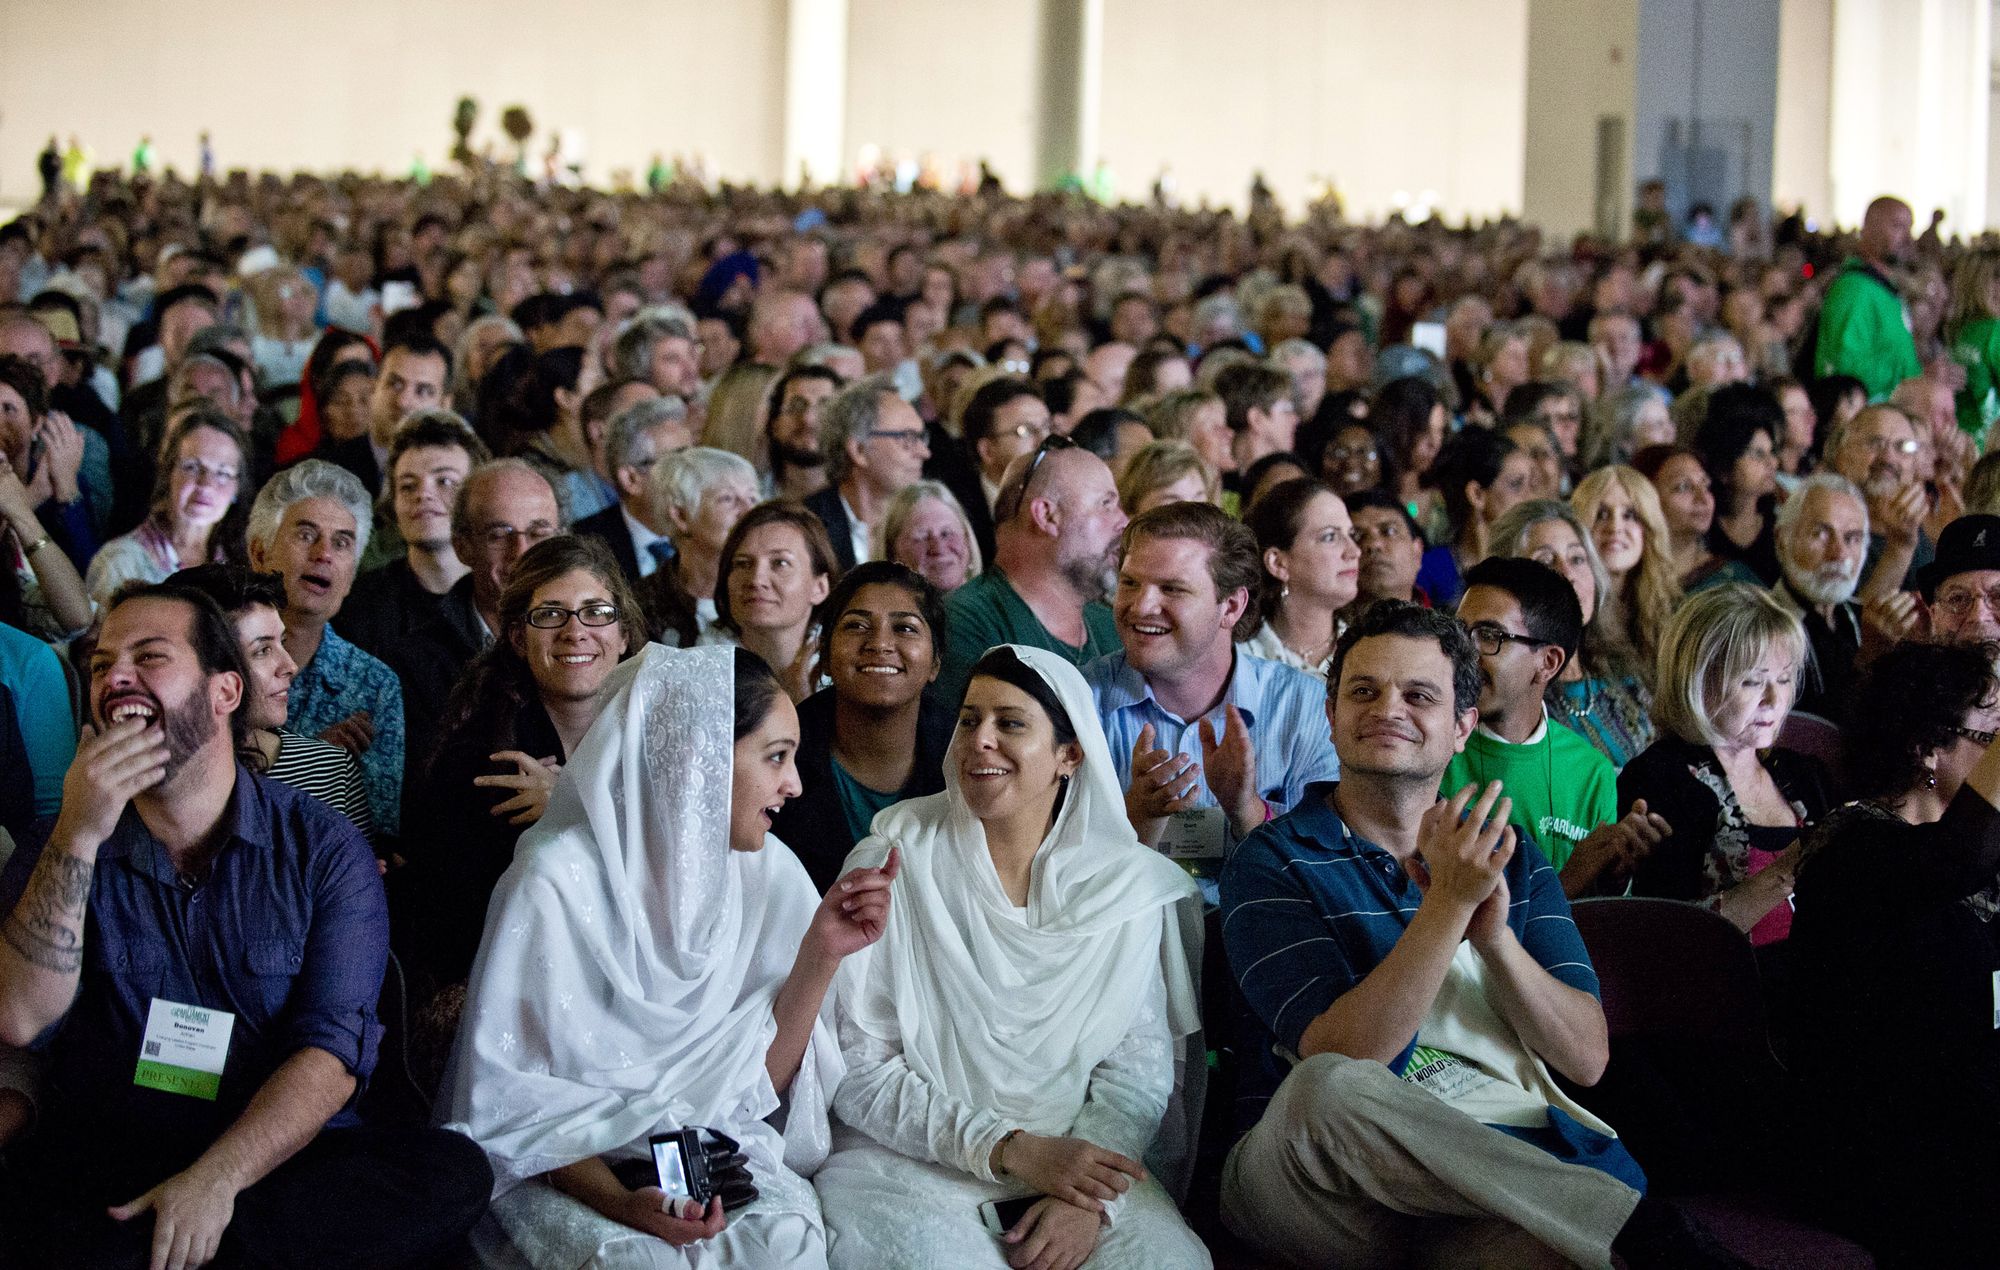 Thousands expected at Parliament of The World’s Religions in Toronto